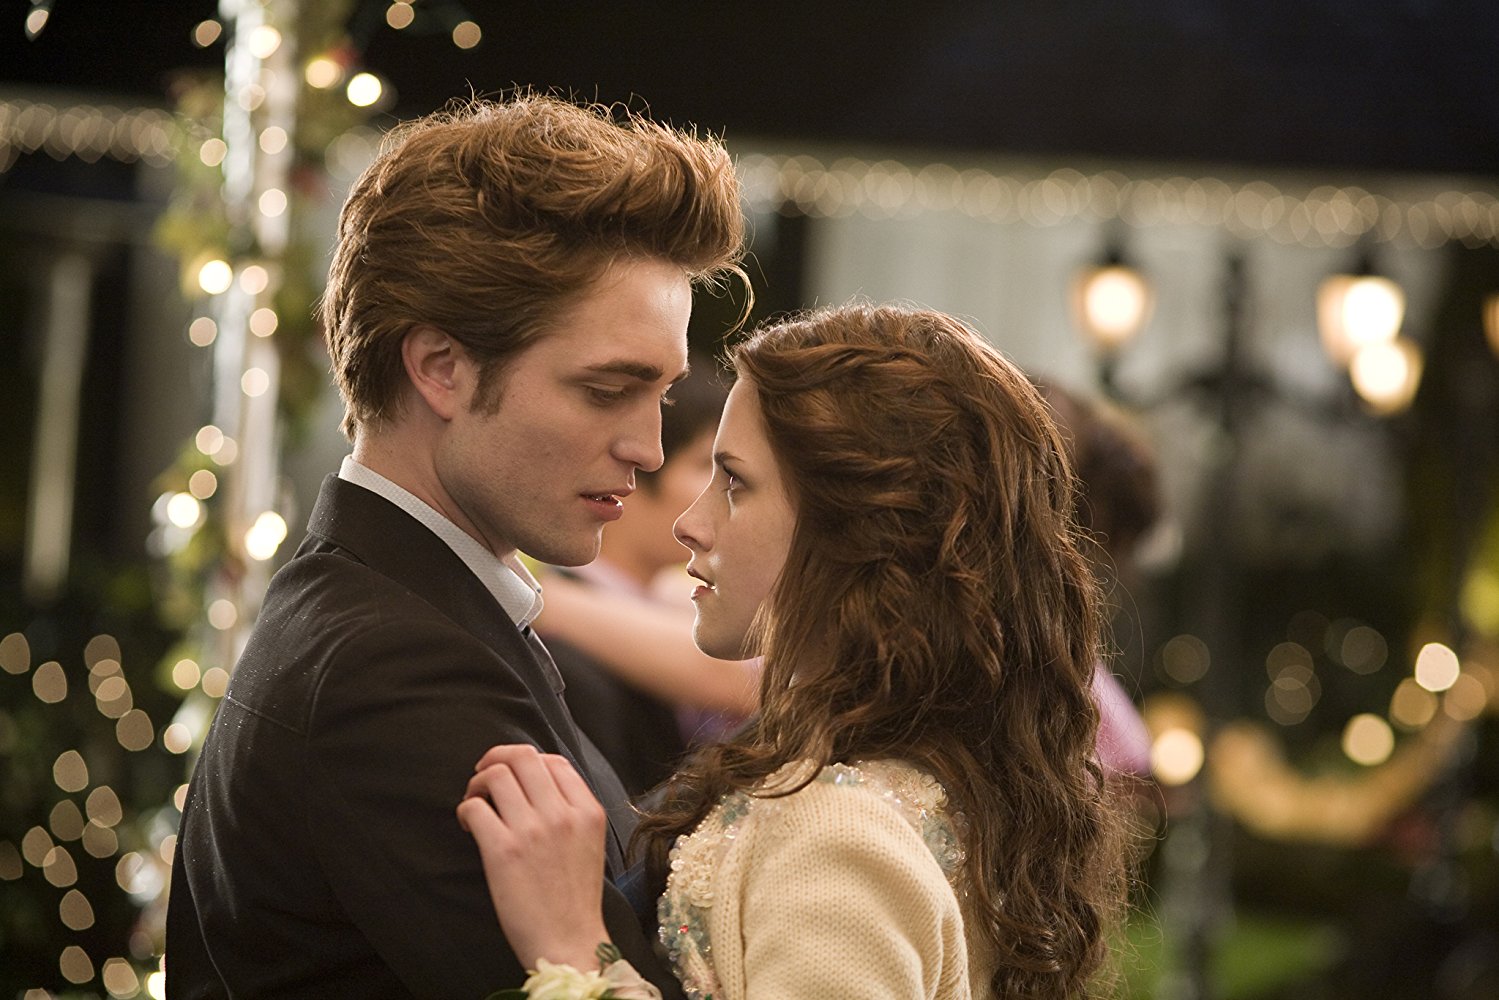 chris pruyne recommends twilight movie full movie online pic